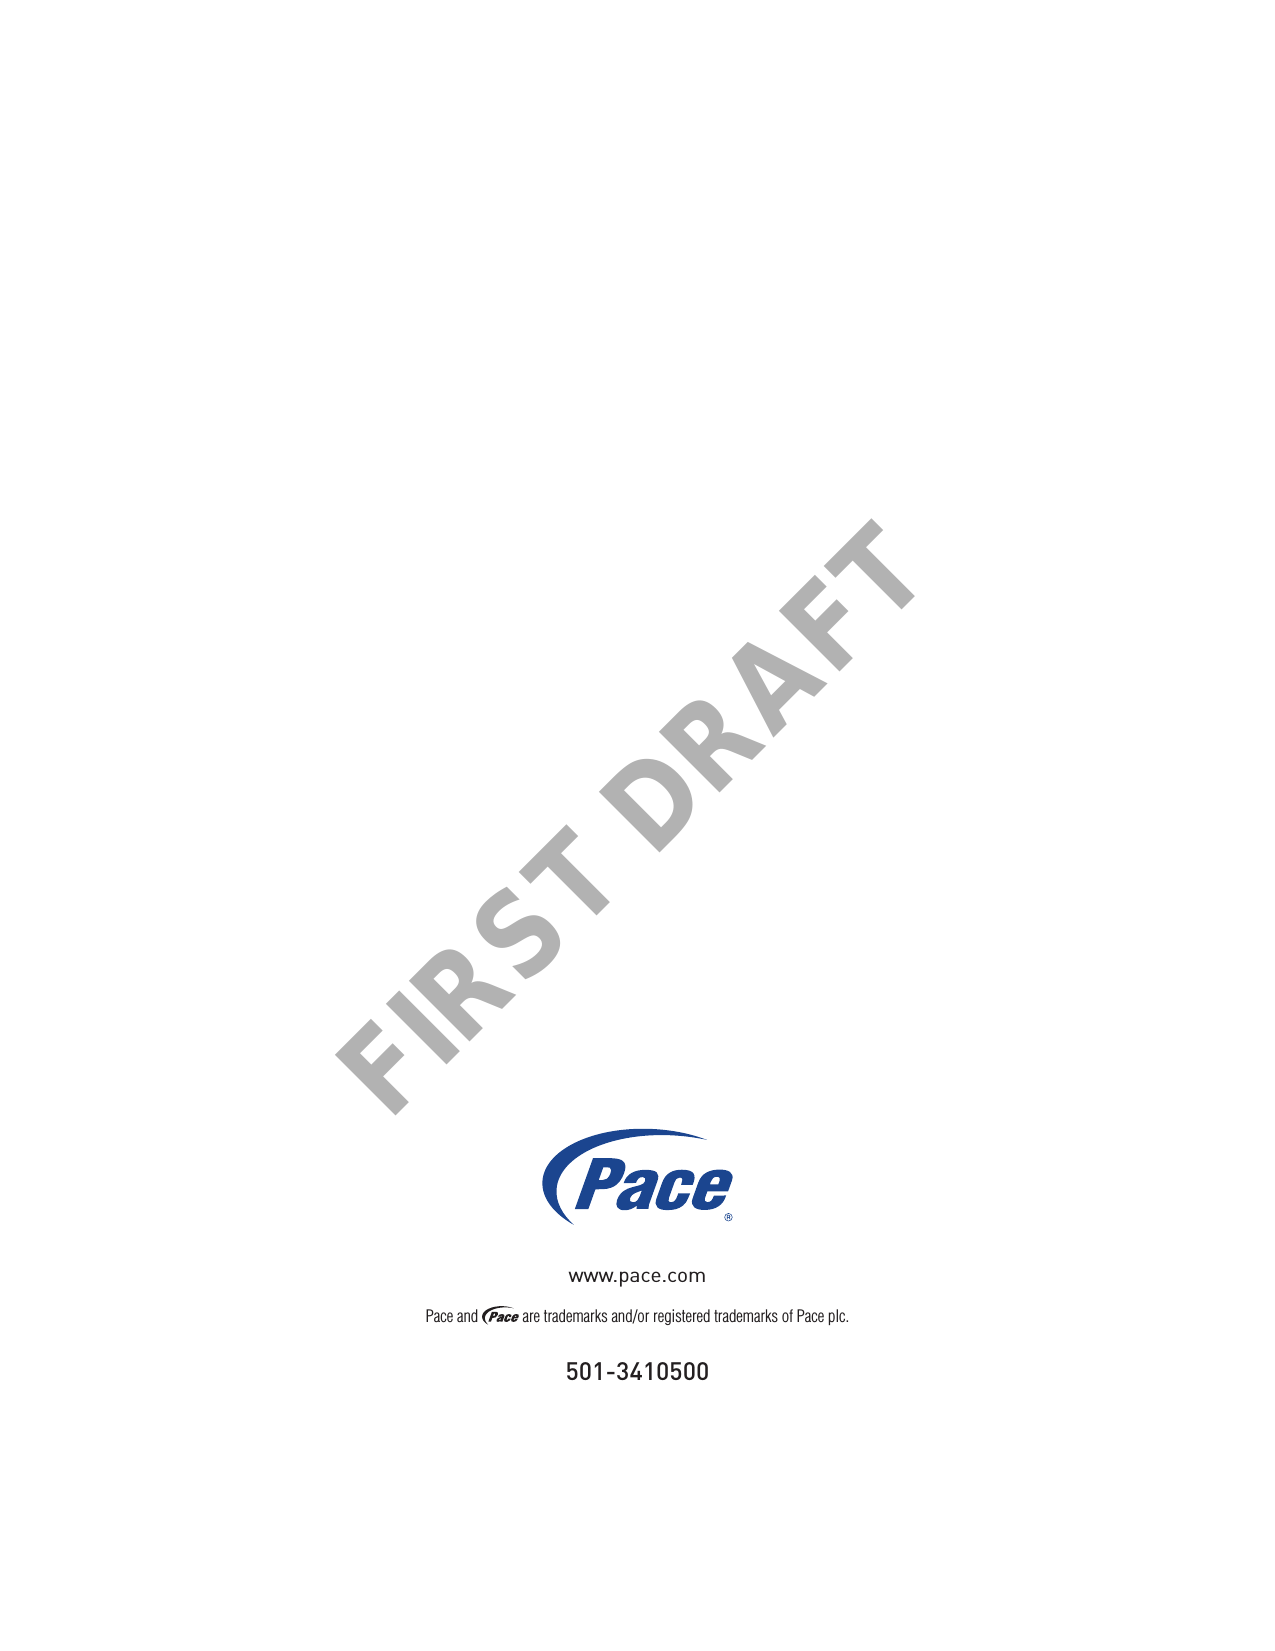 501-3410500Pace and   are trademarks and/or registered trademarks of Pace plc.www.pace.comFIRST DRAFT